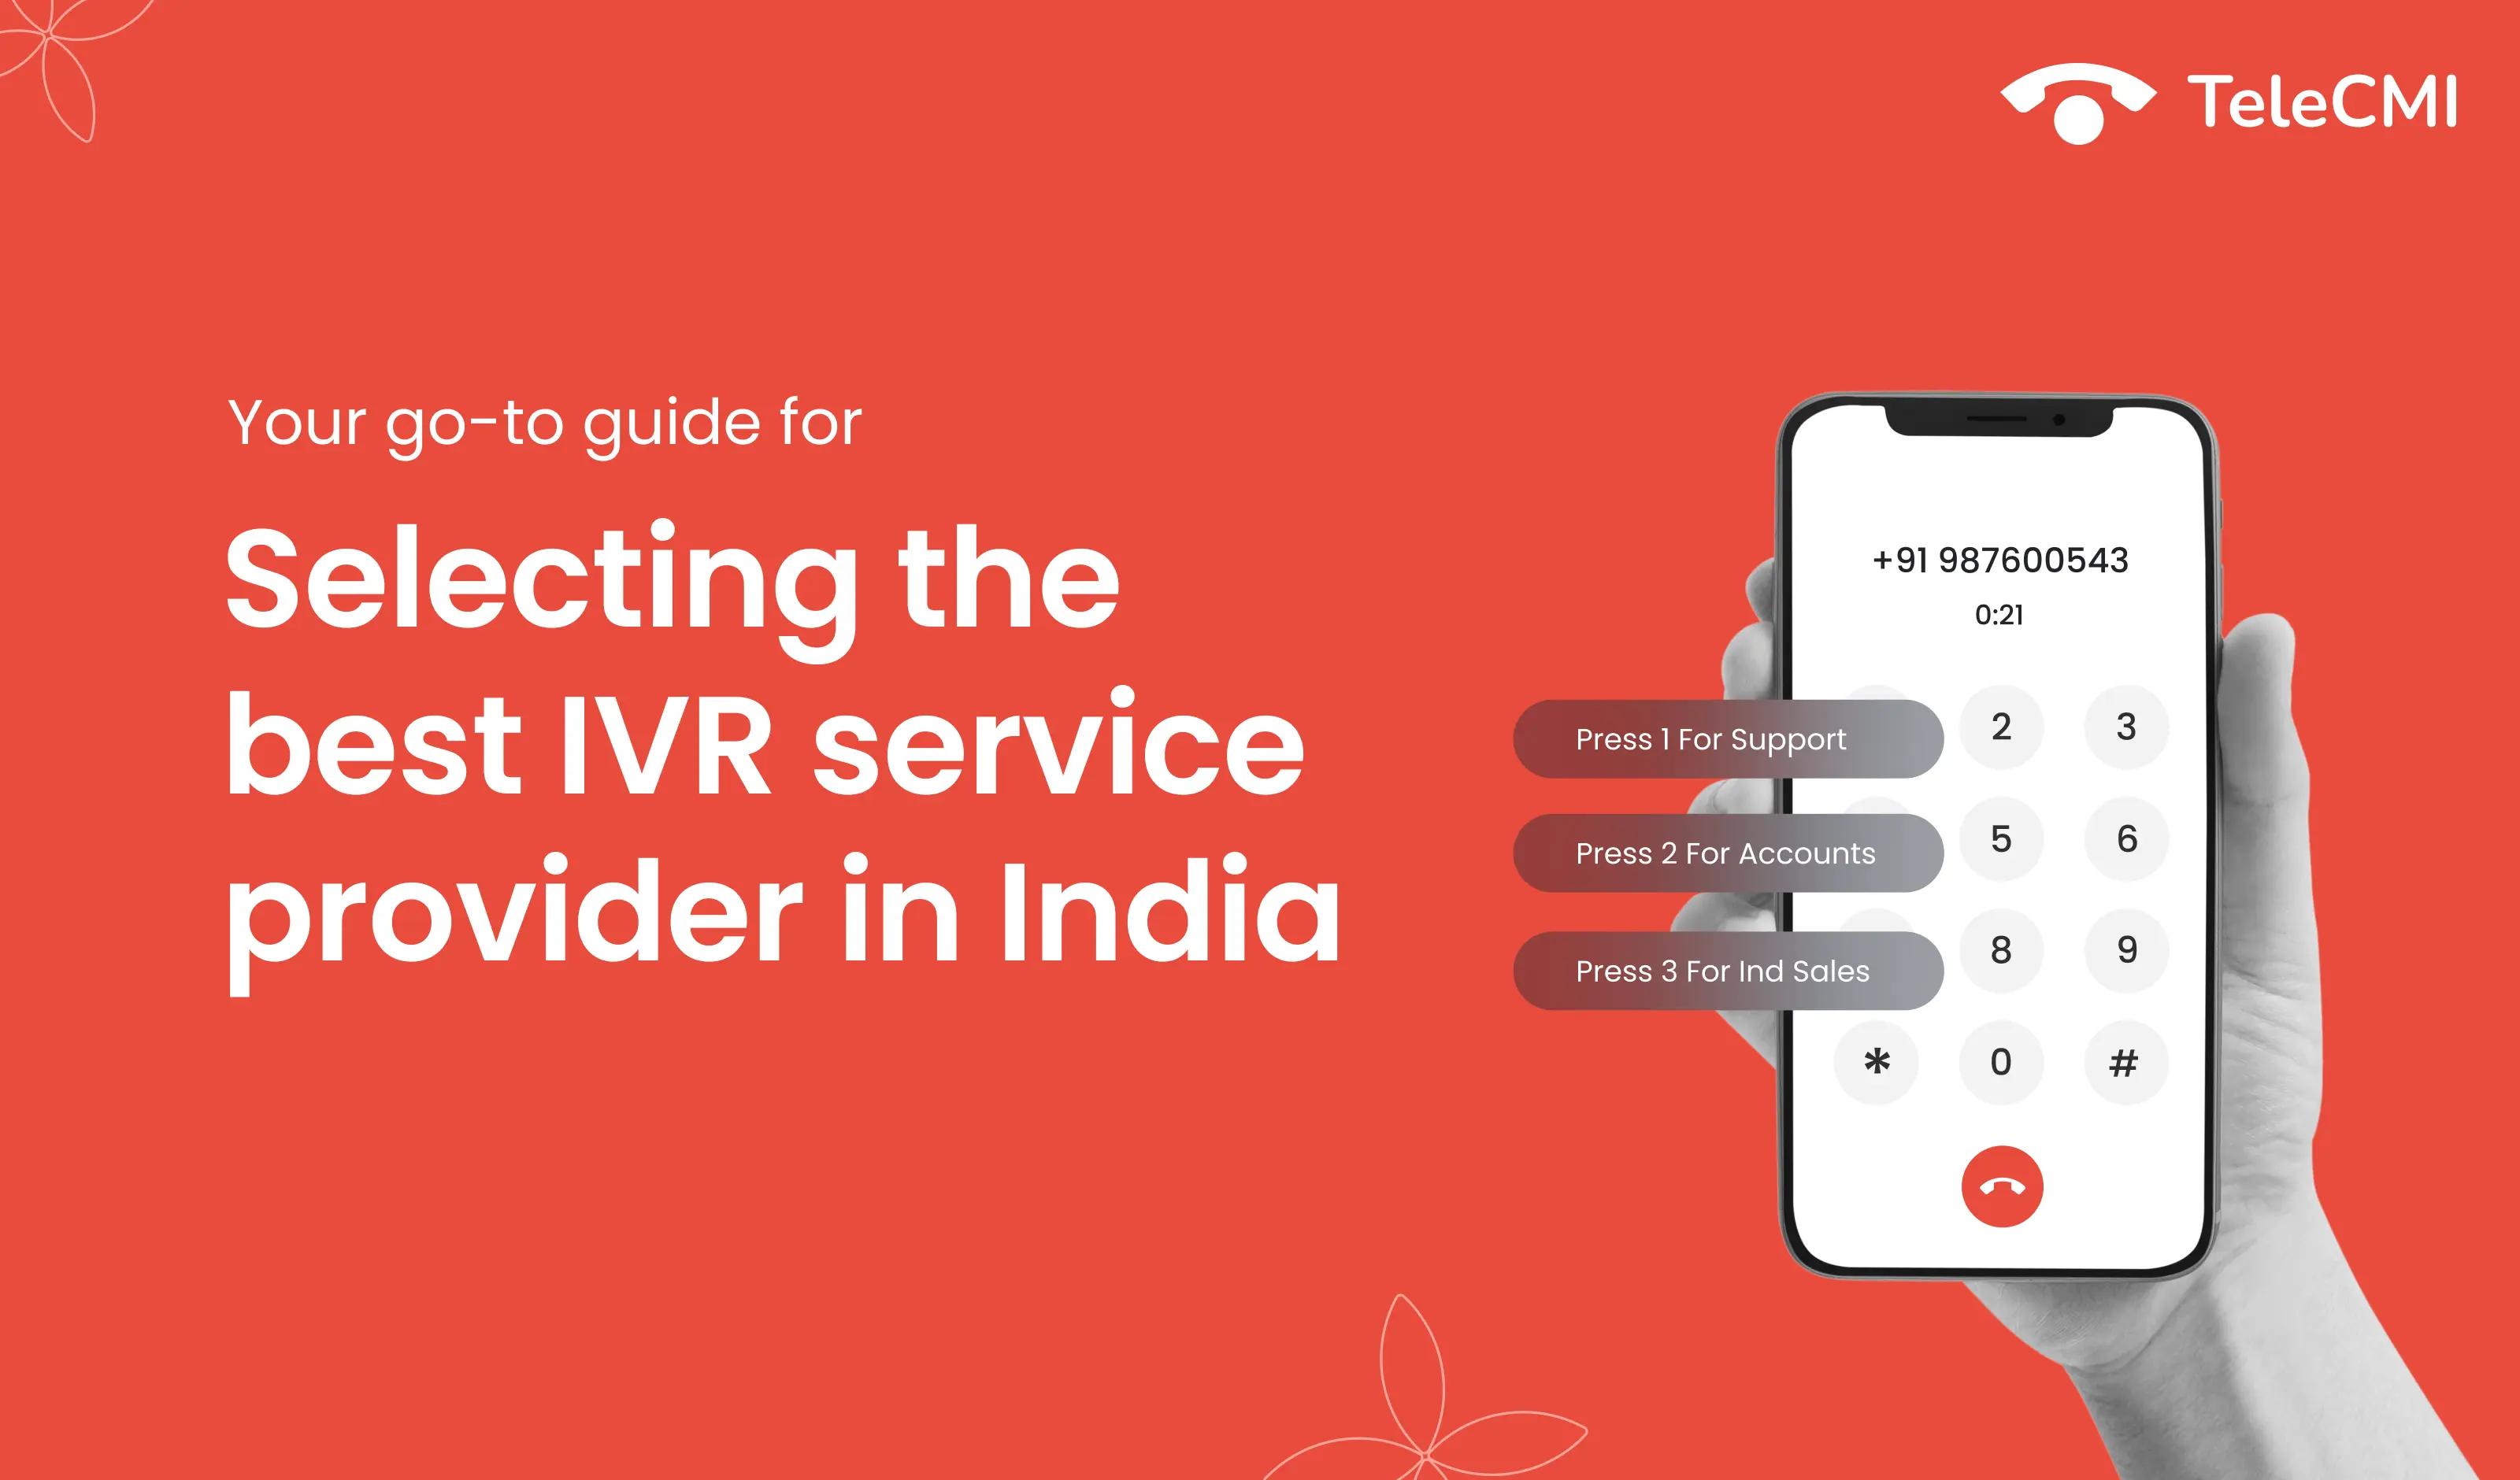 Your Go-To Guide for Selecting the Best IVR Service Provider in India